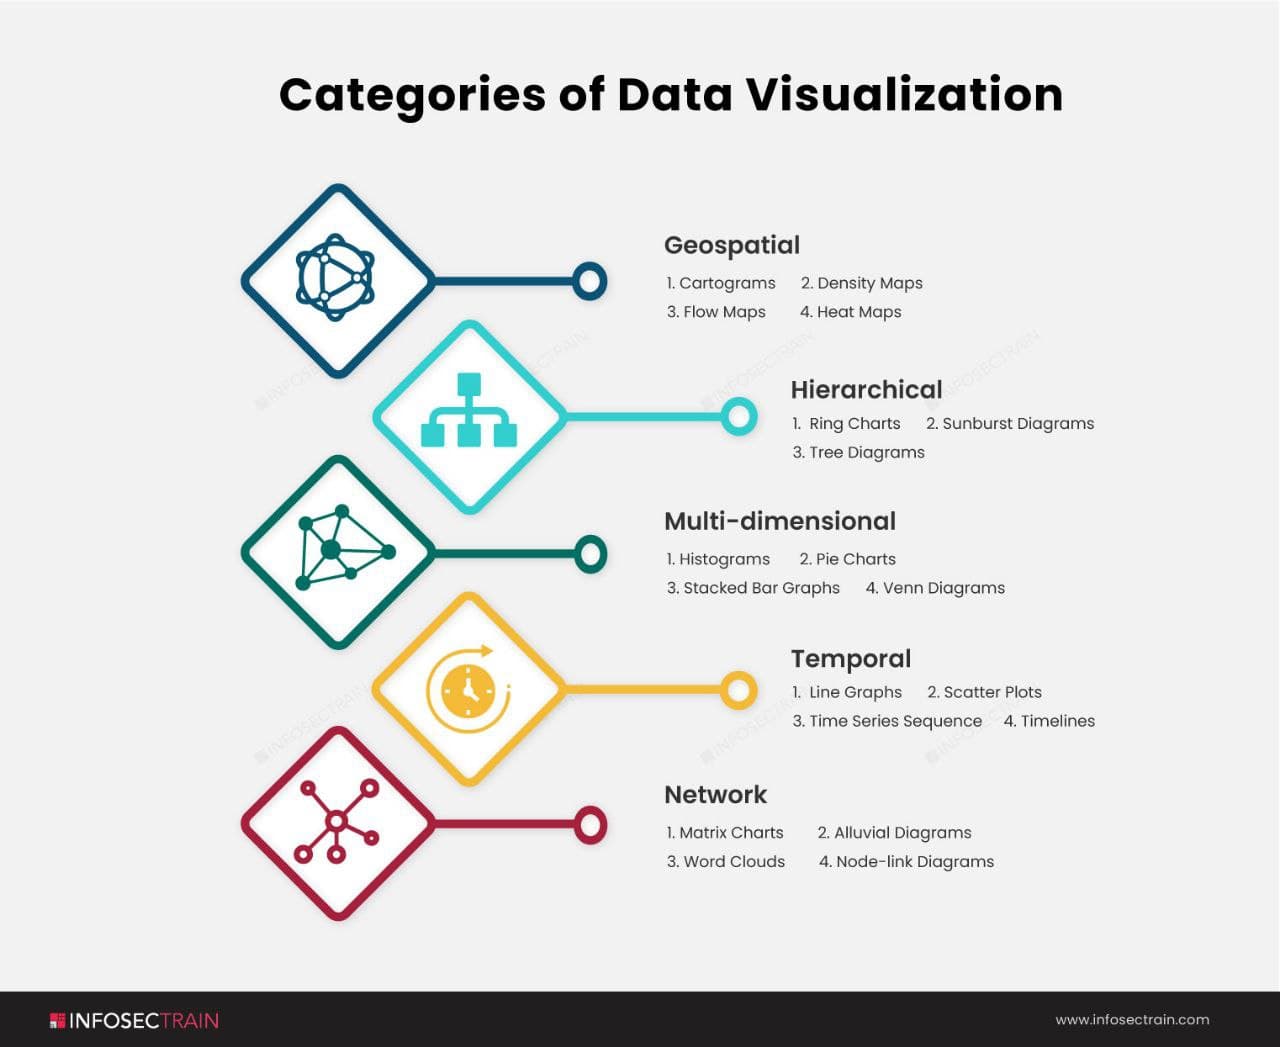 Categories of Data Visualization